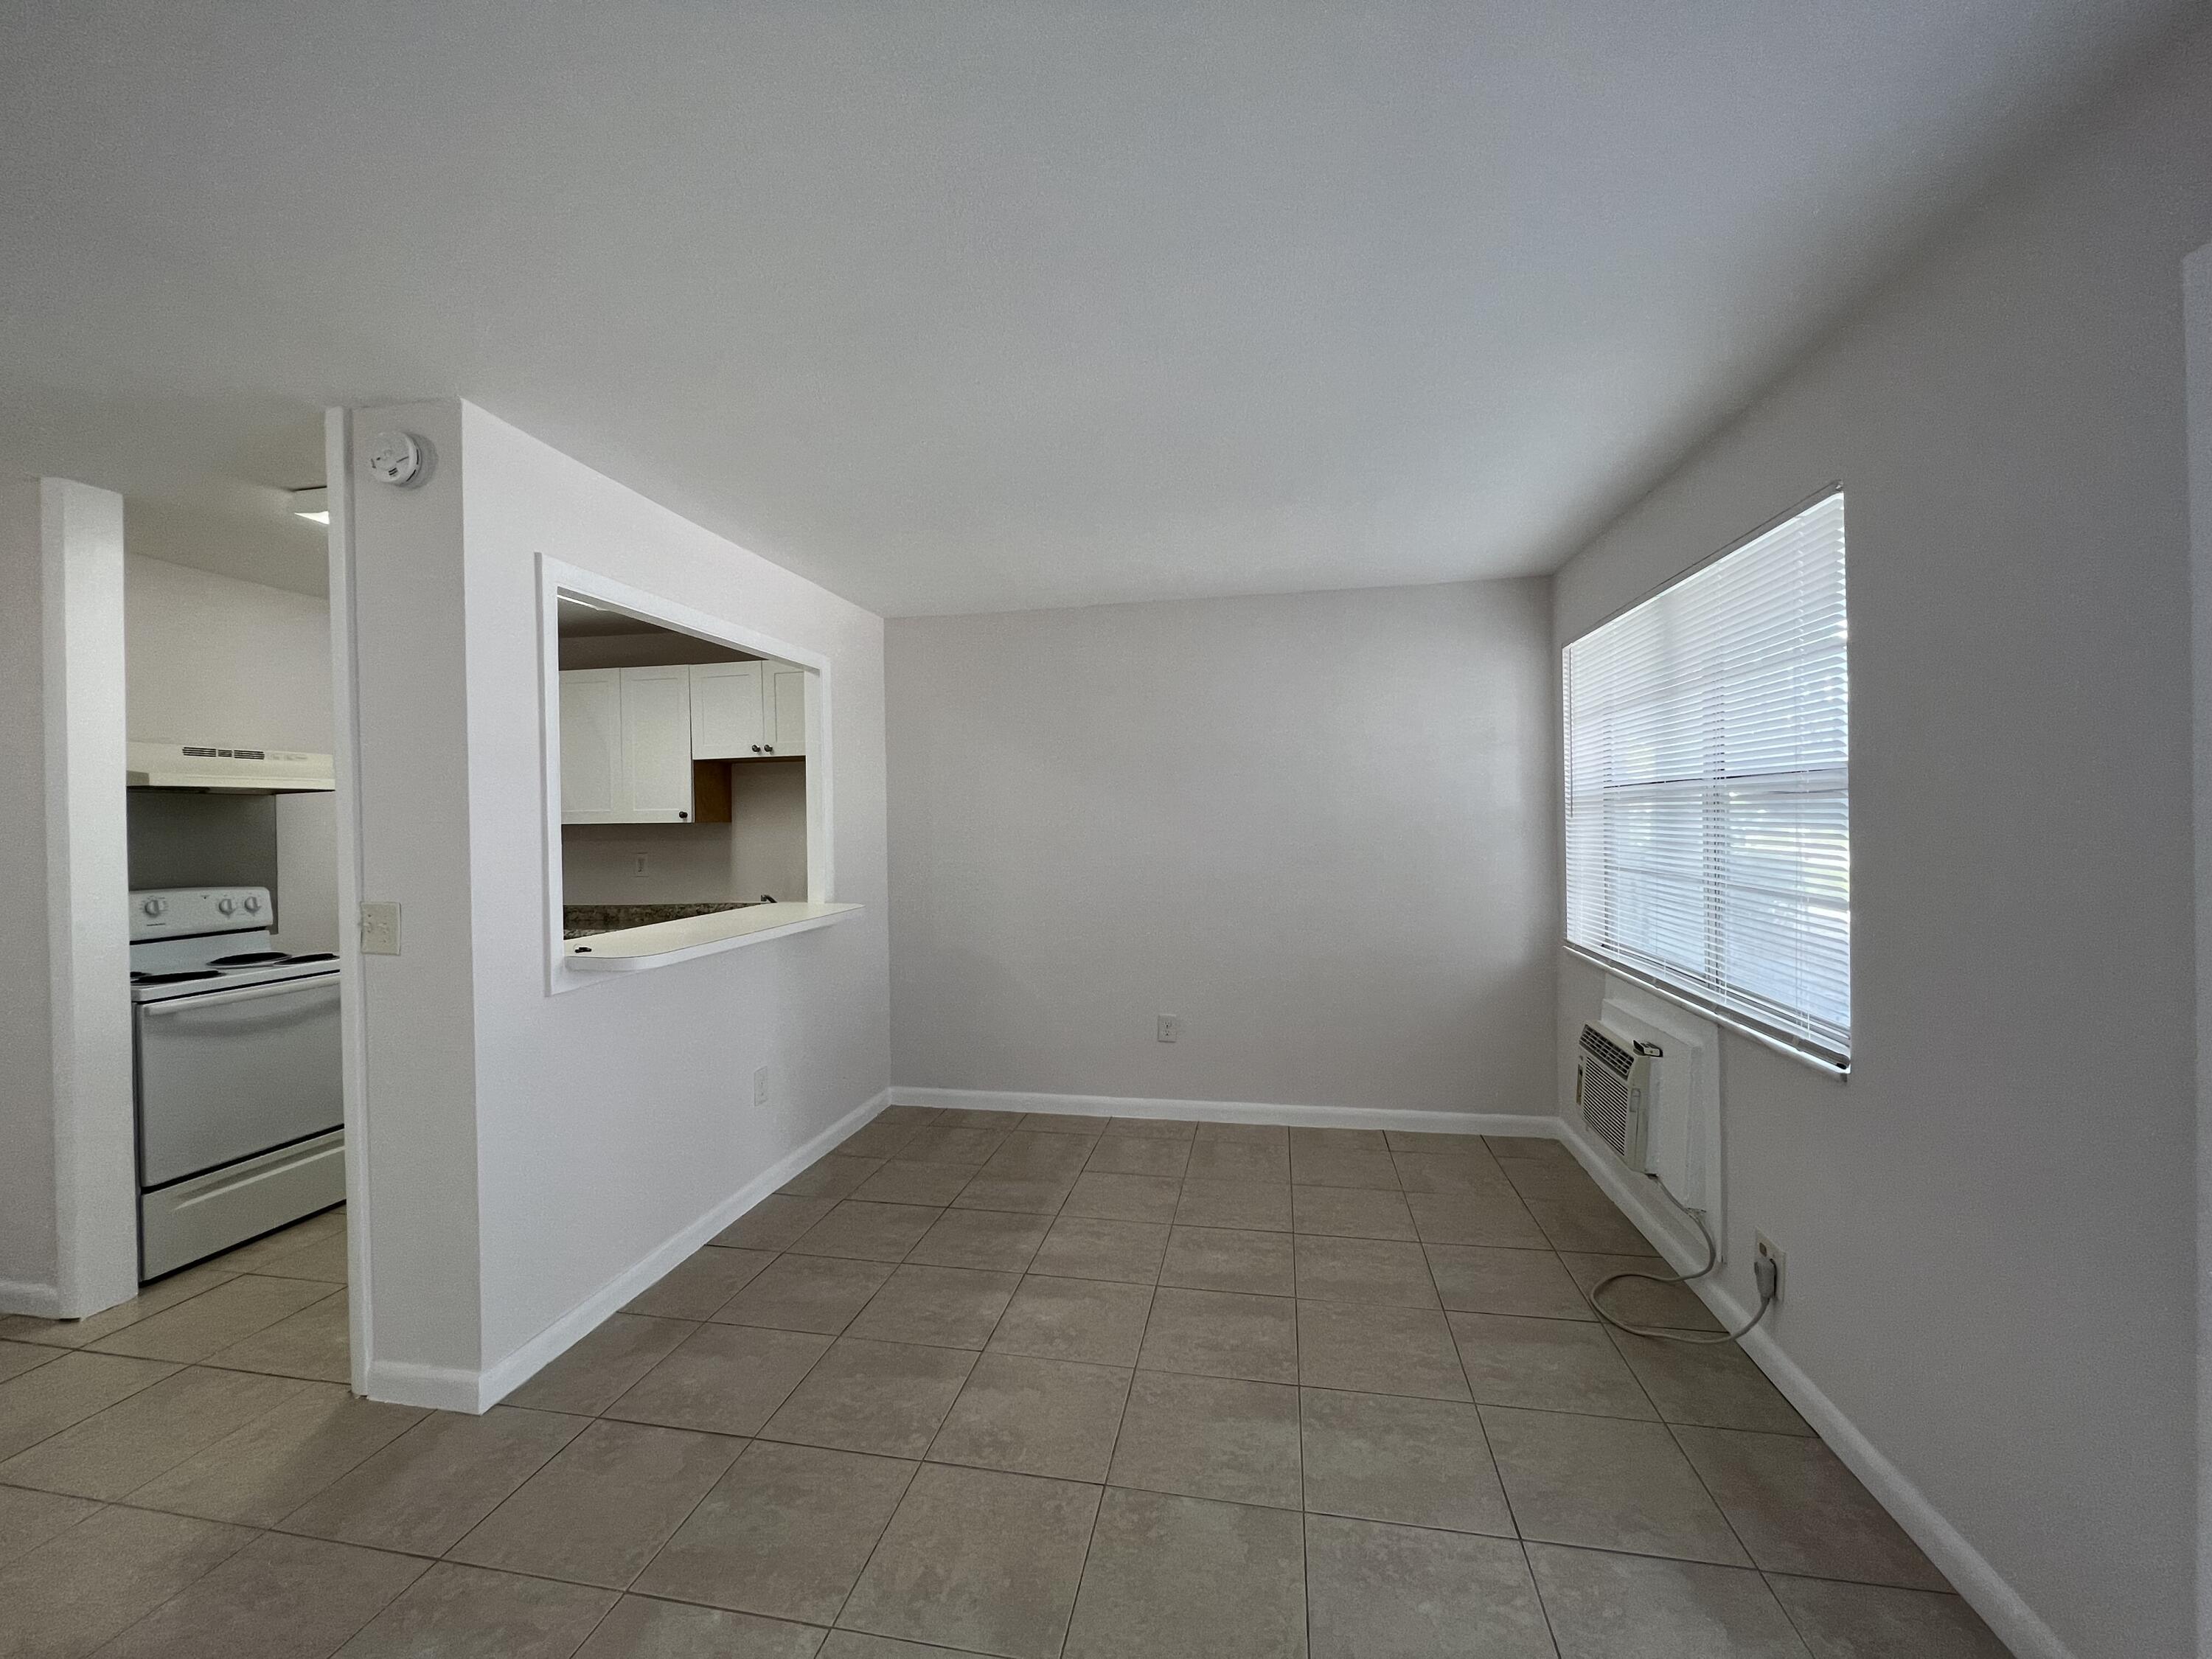 a view of an empty room with a kitchen